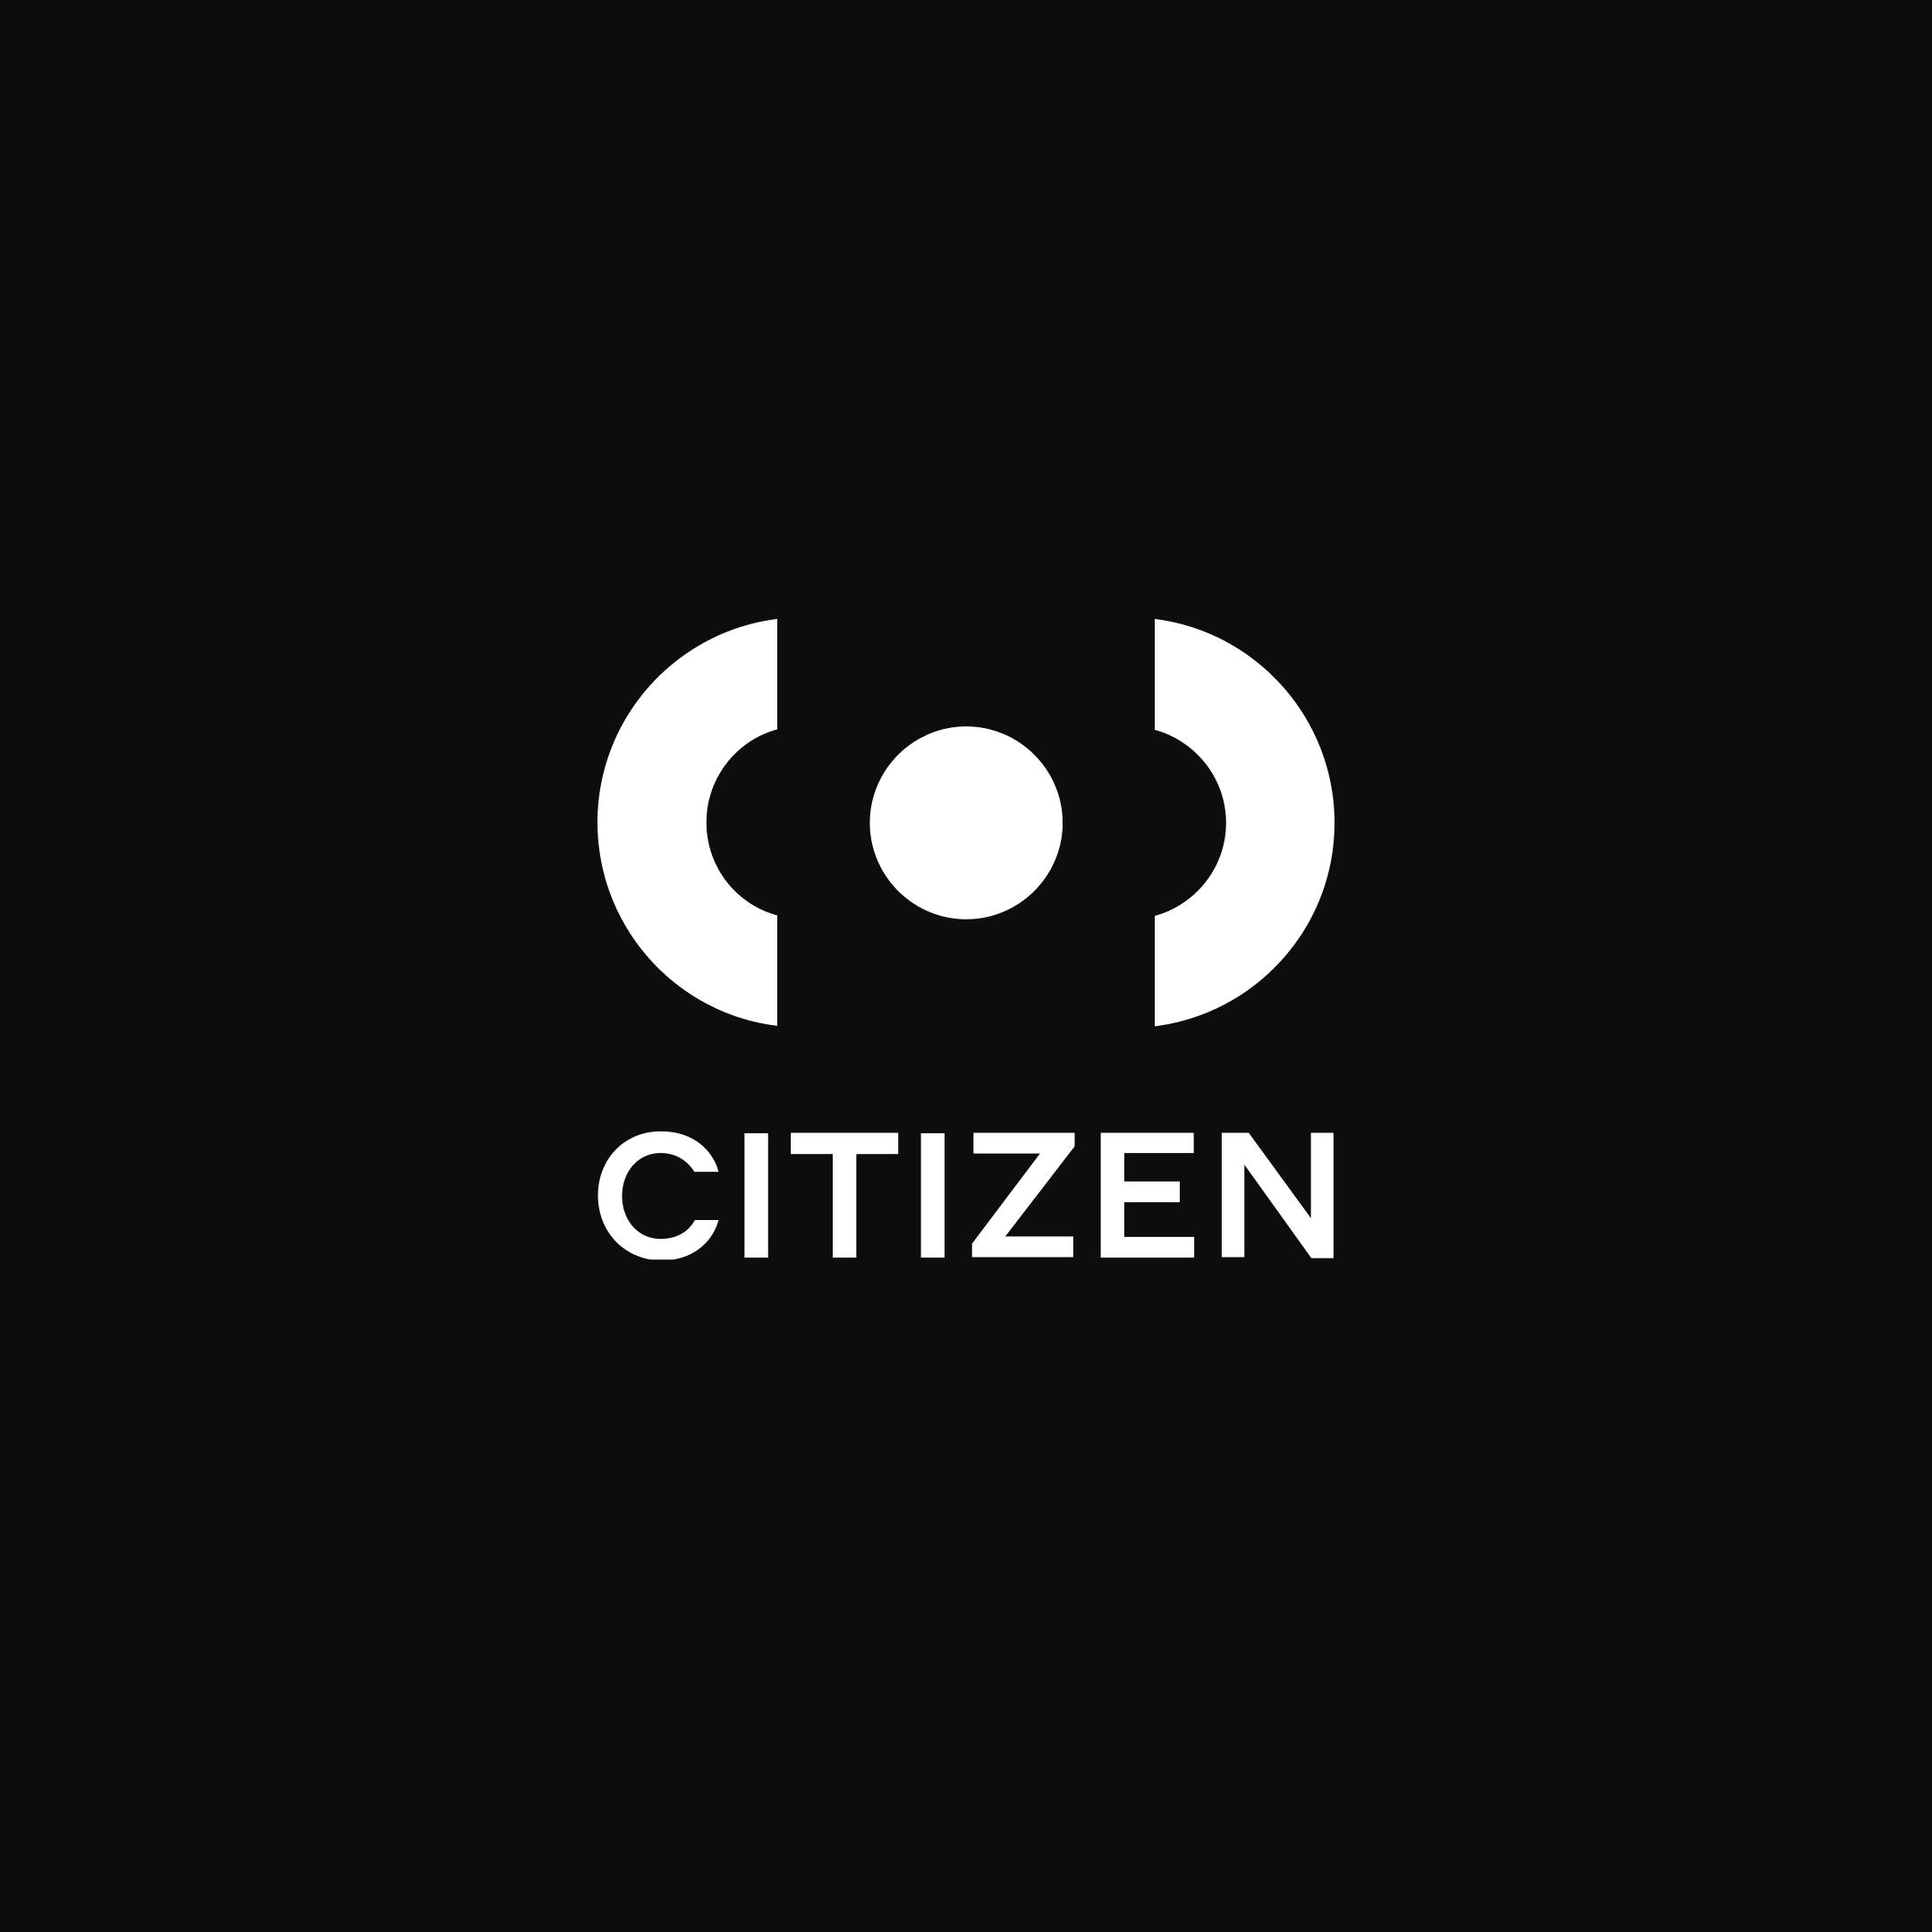 Citizen - Connect and stay safe.